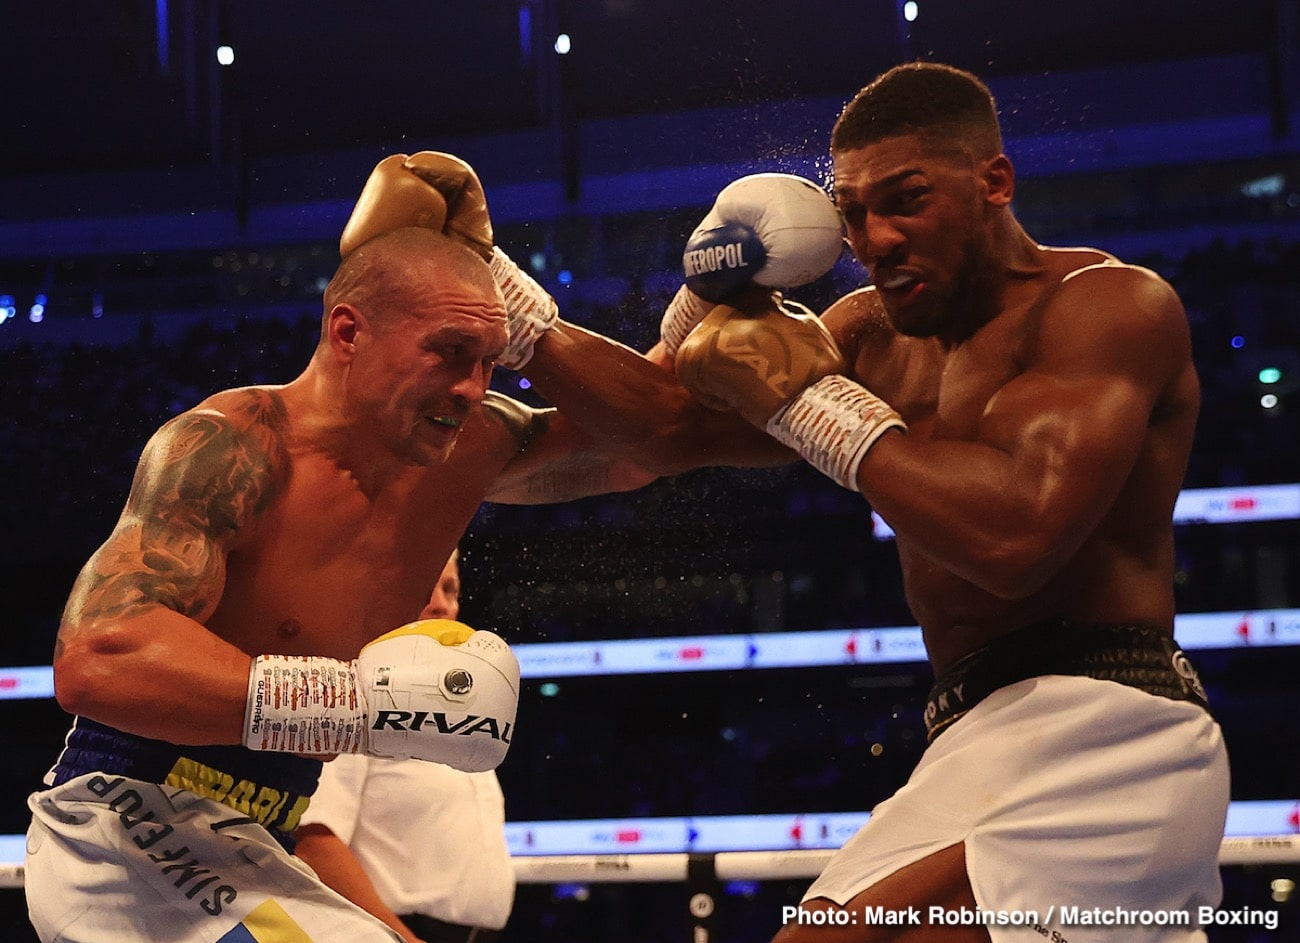 Image: David Haye wants Joshua to bend the rules in Usyk rematch